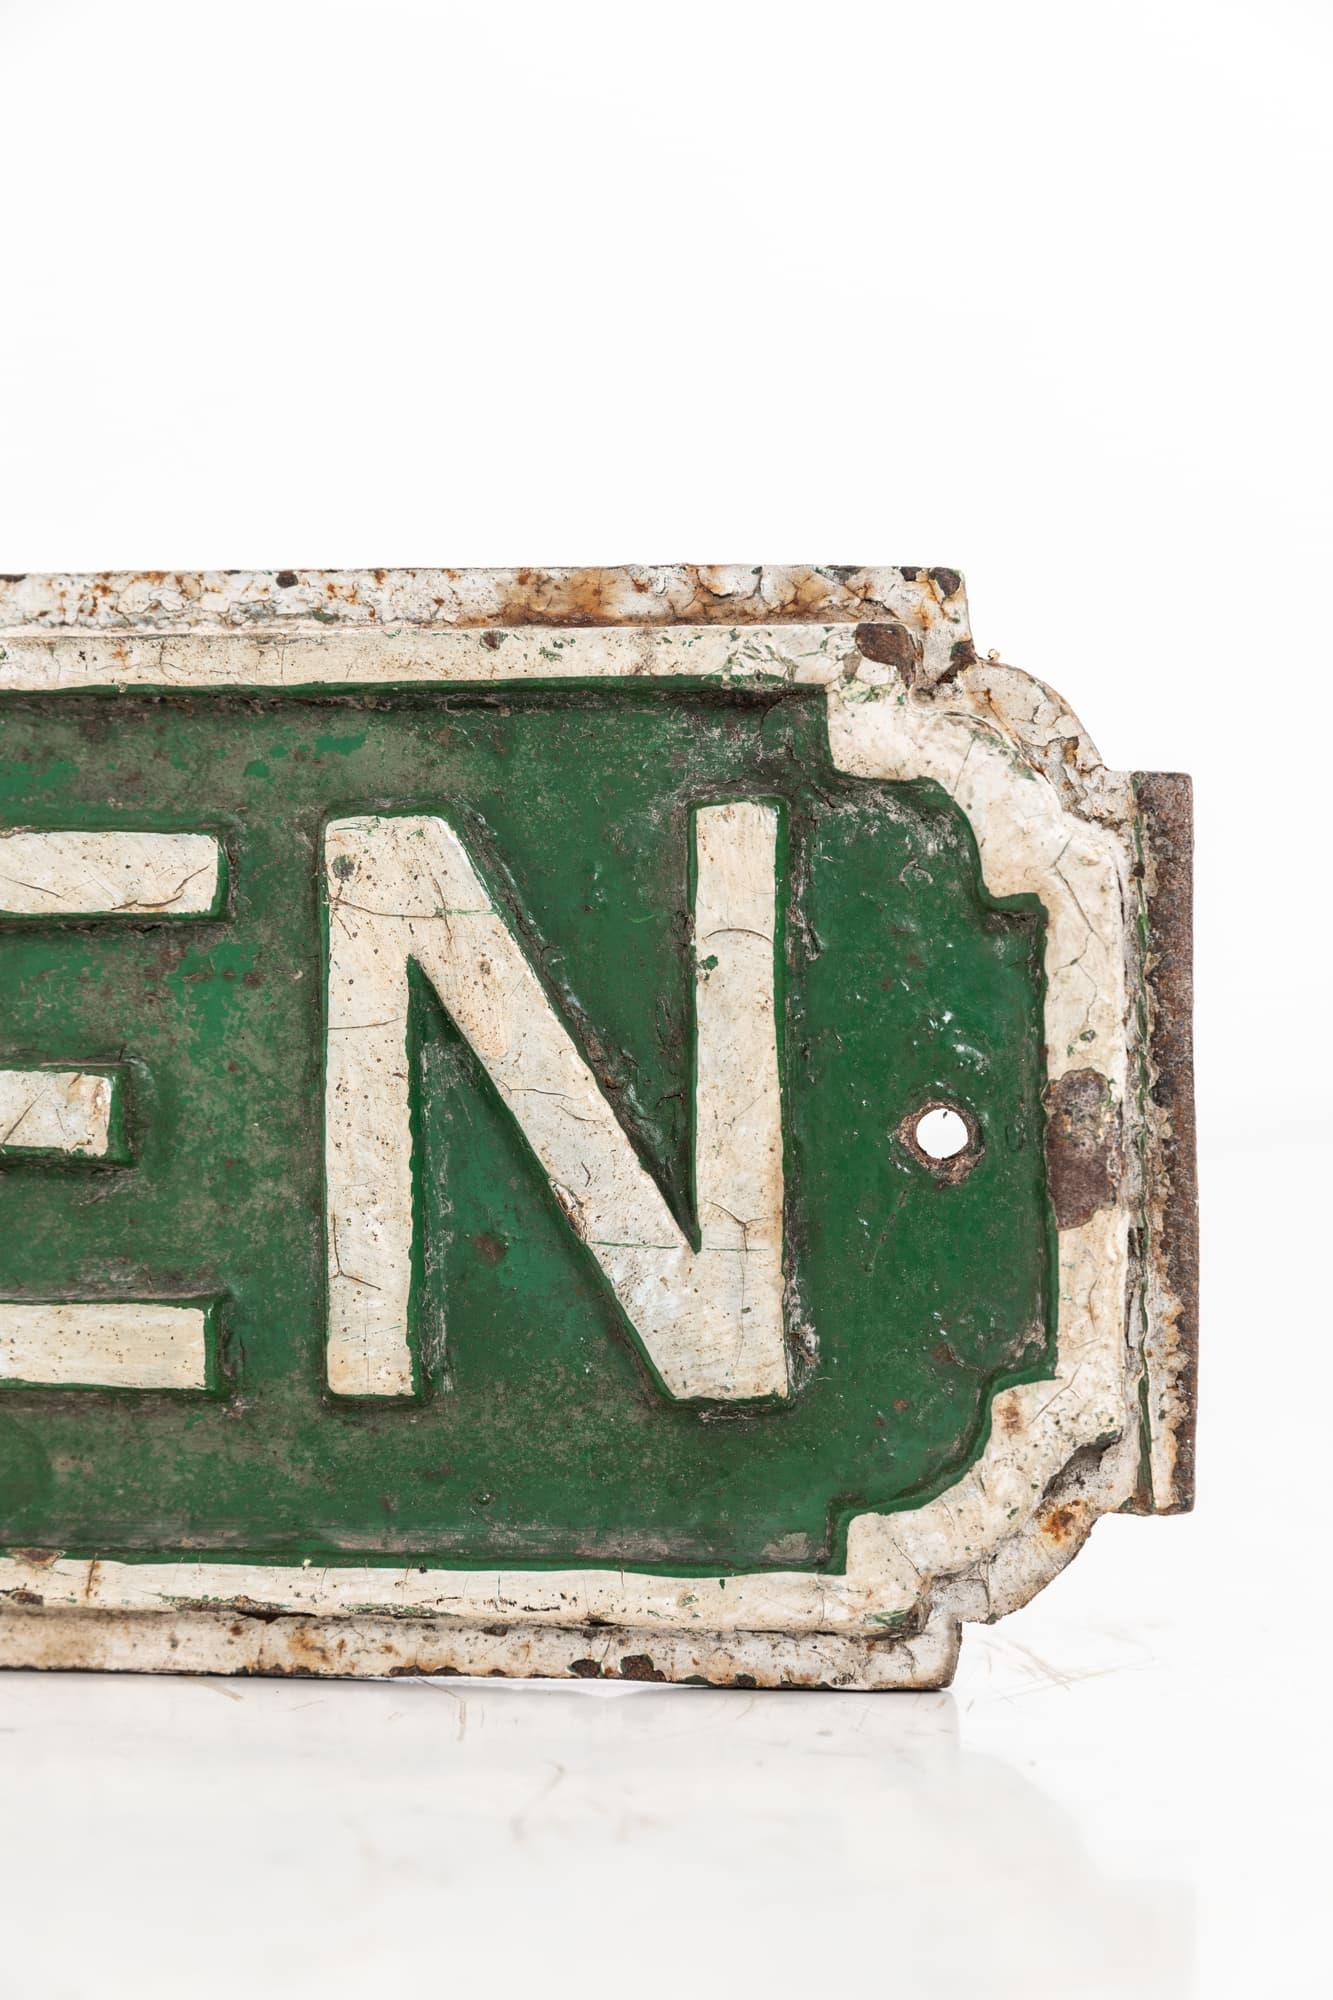 

A large heavy duty cast iron Gentlemen sign. c.1930

In totally original condition with an amazing patina to the green paint. Likely once mounted outside a public restroom or similar.
